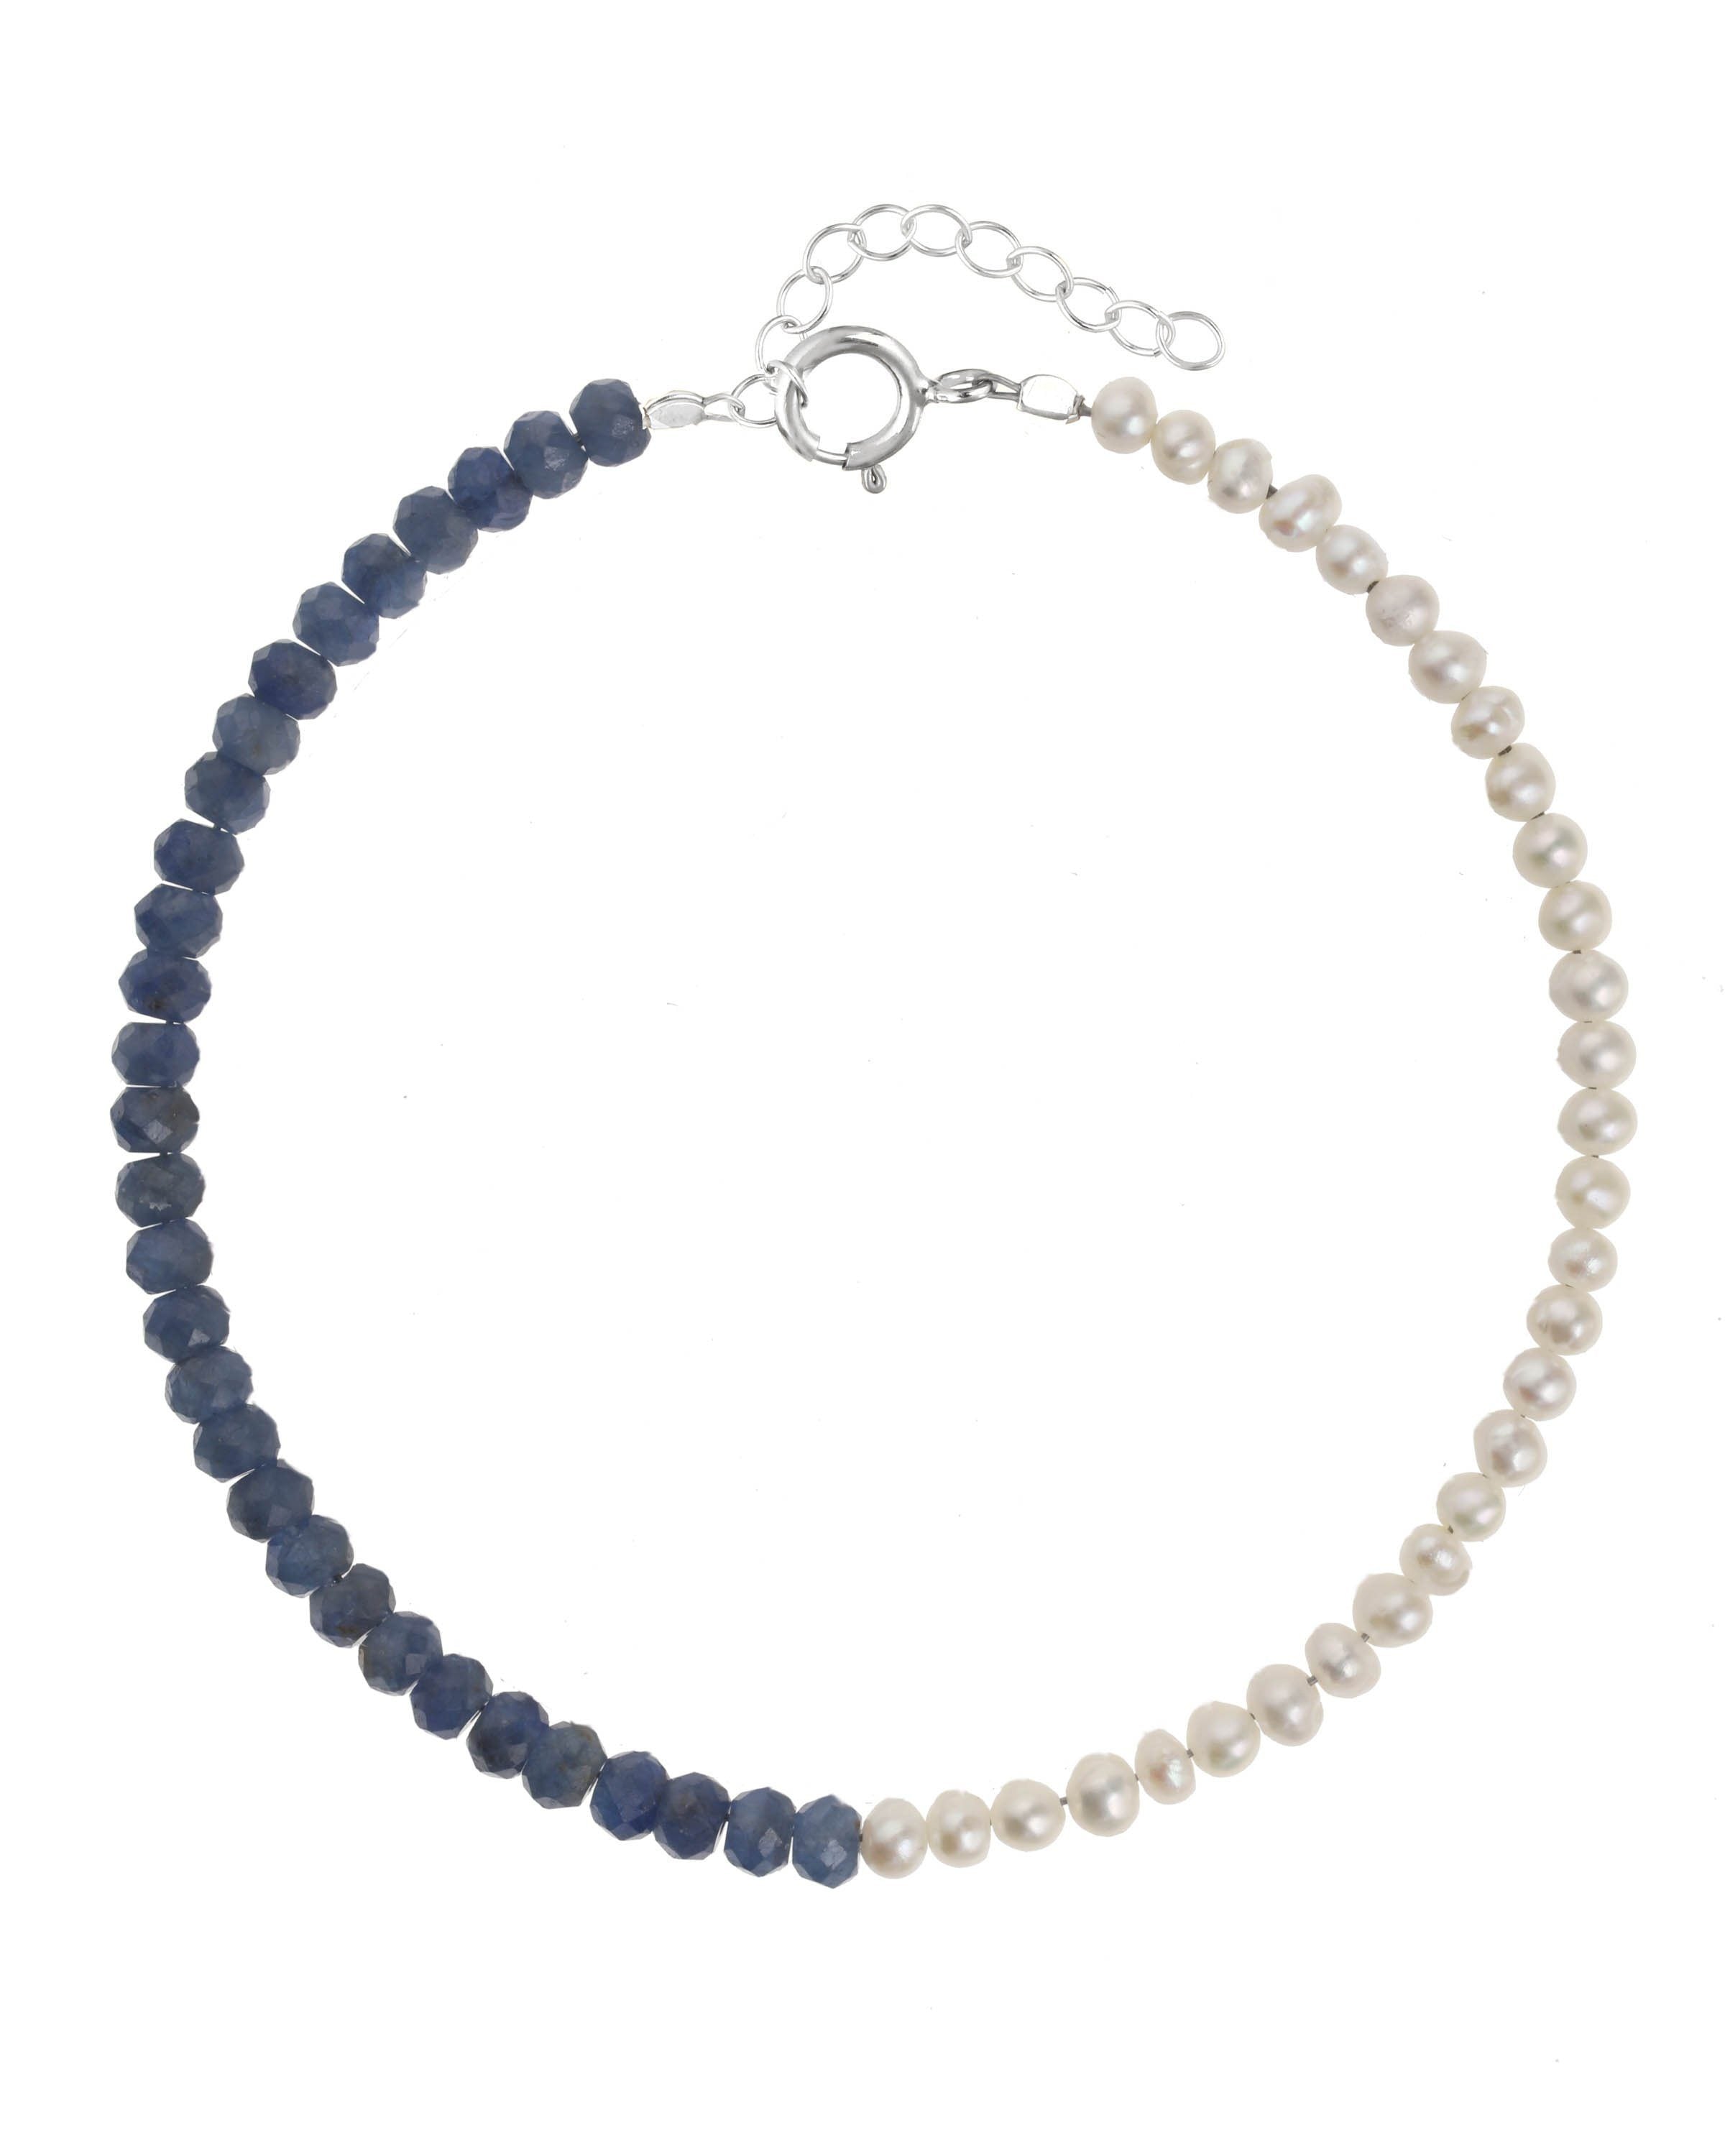 Elo Bracelet by KOZAKH. A 6 to 7 inch adjustable length bracelet, crafted in Sterling Silver. Half of the bracelet strand features 3.5mm Freshwater Pearls and 3.5mm Faceted Sapphire beads on the other half.